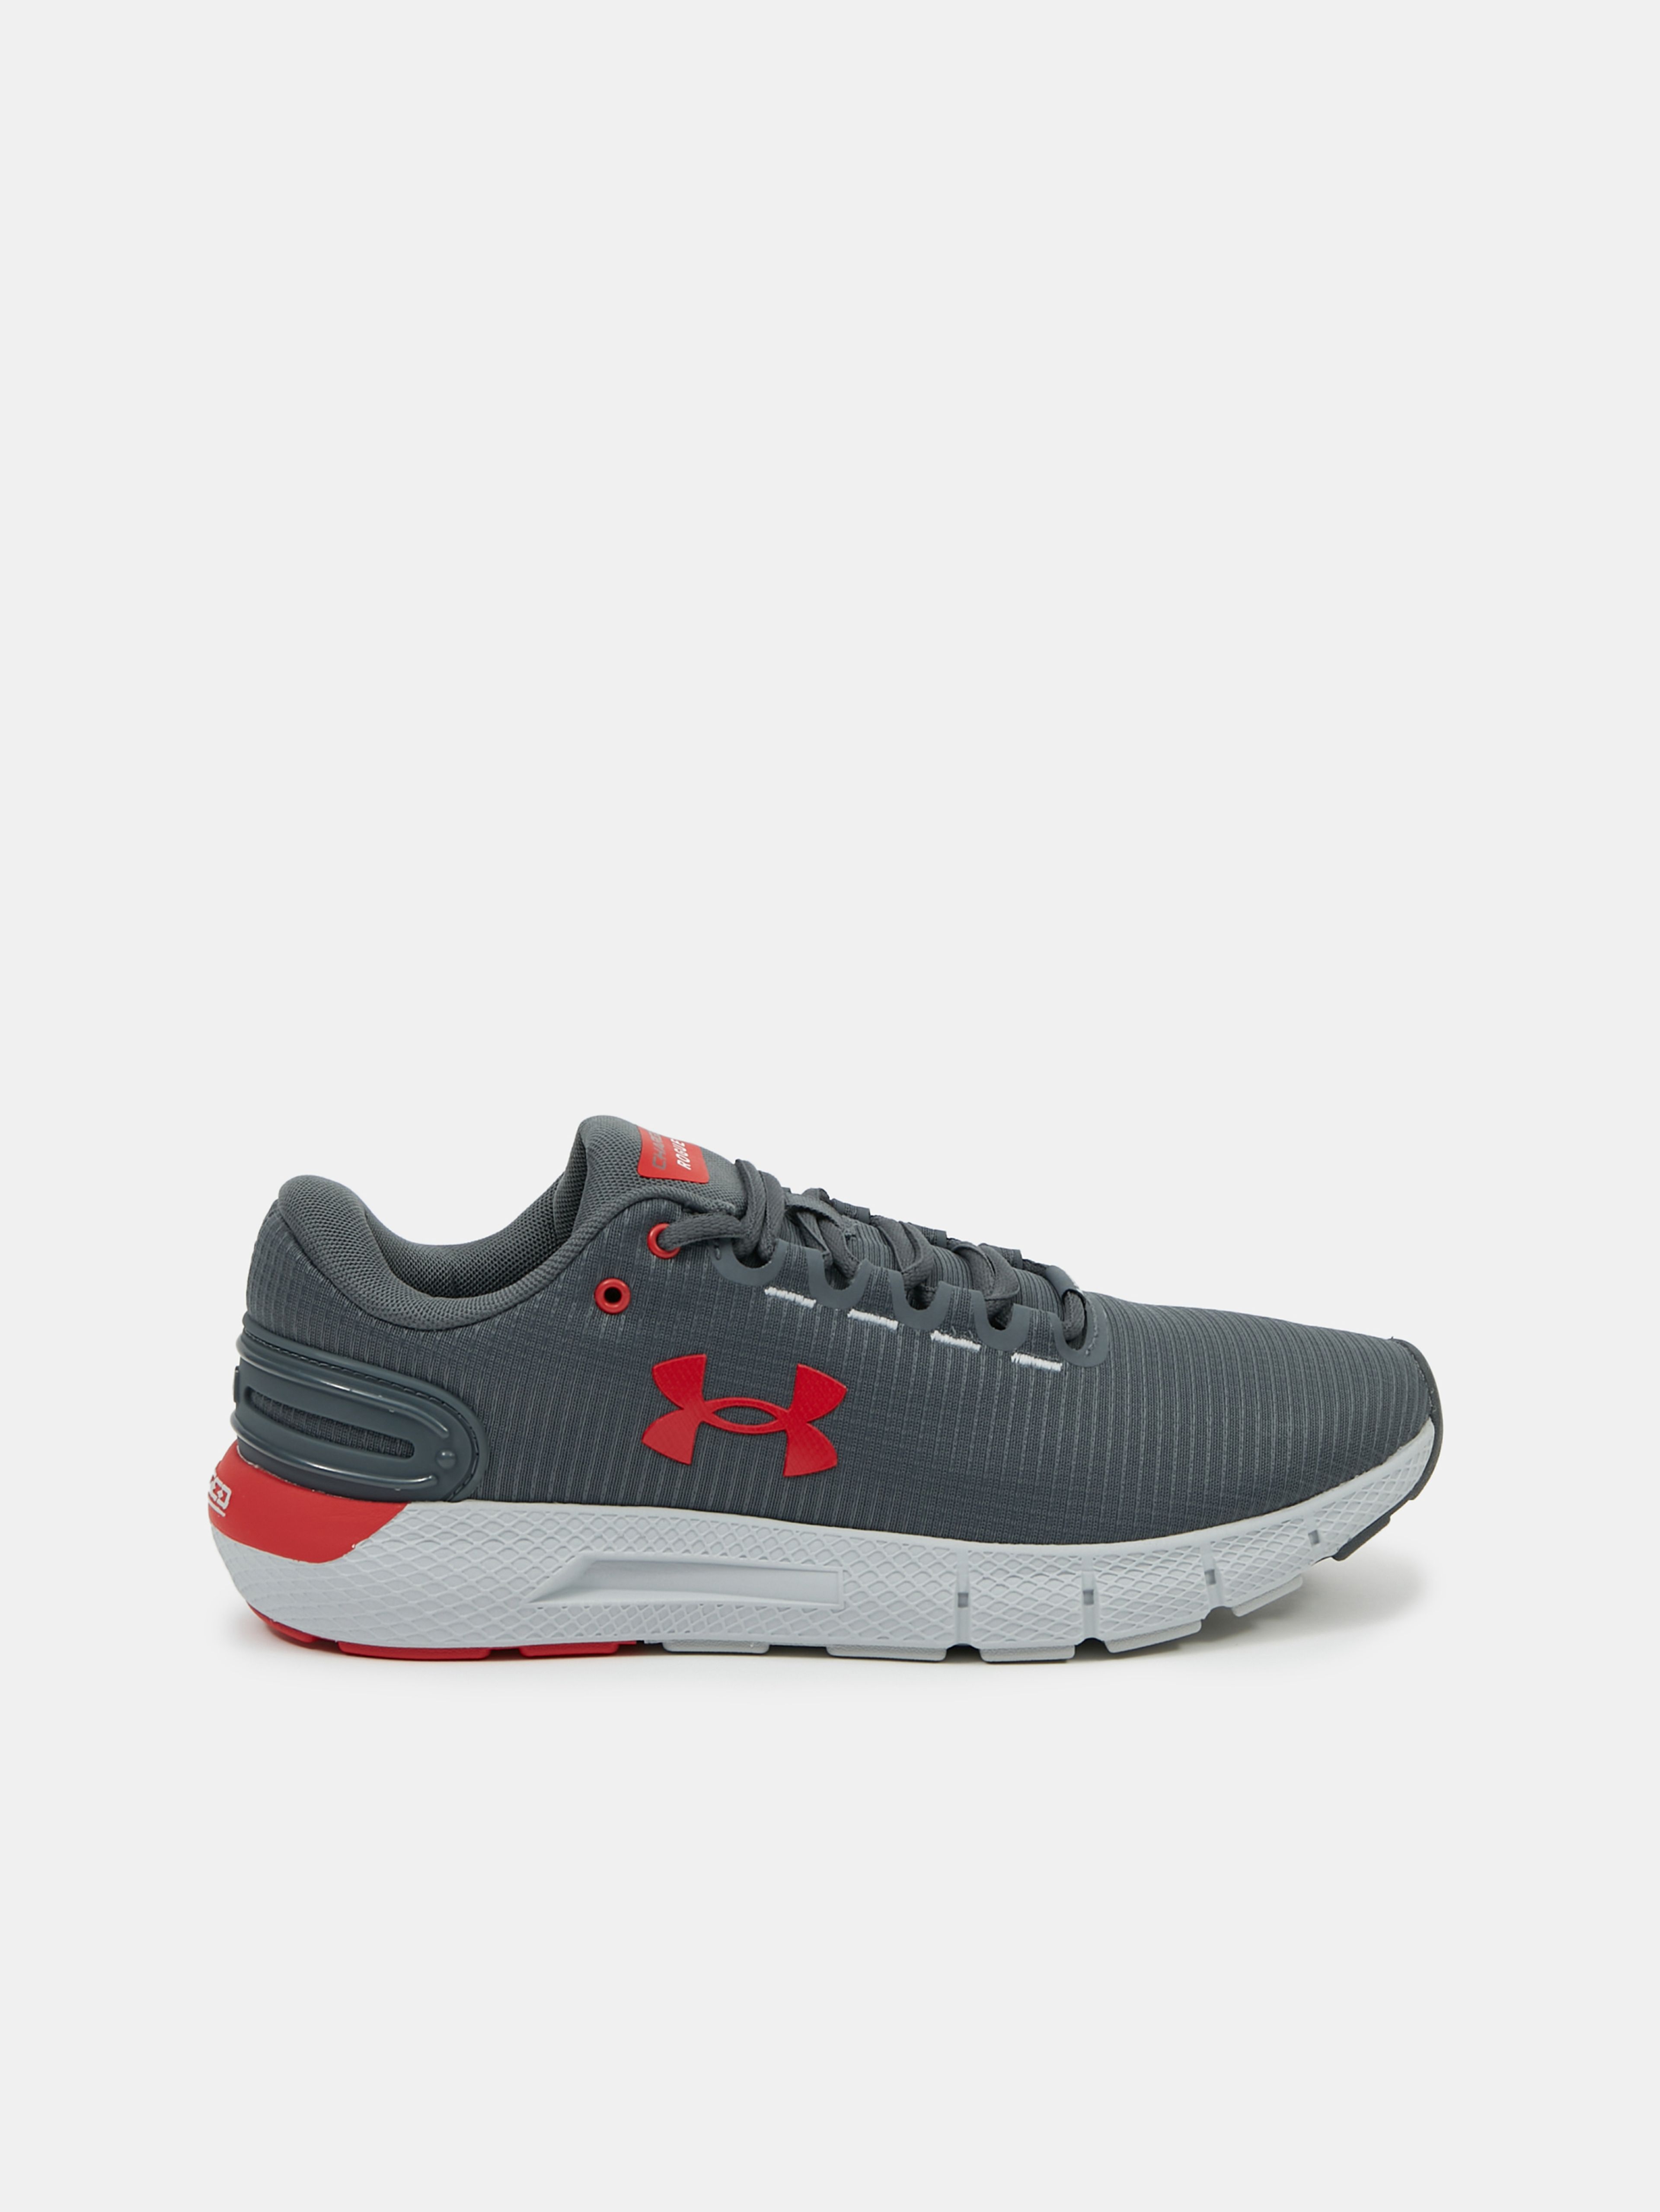 Boty Under Armour UA Charged Rogue 2.5 Storm-GRY